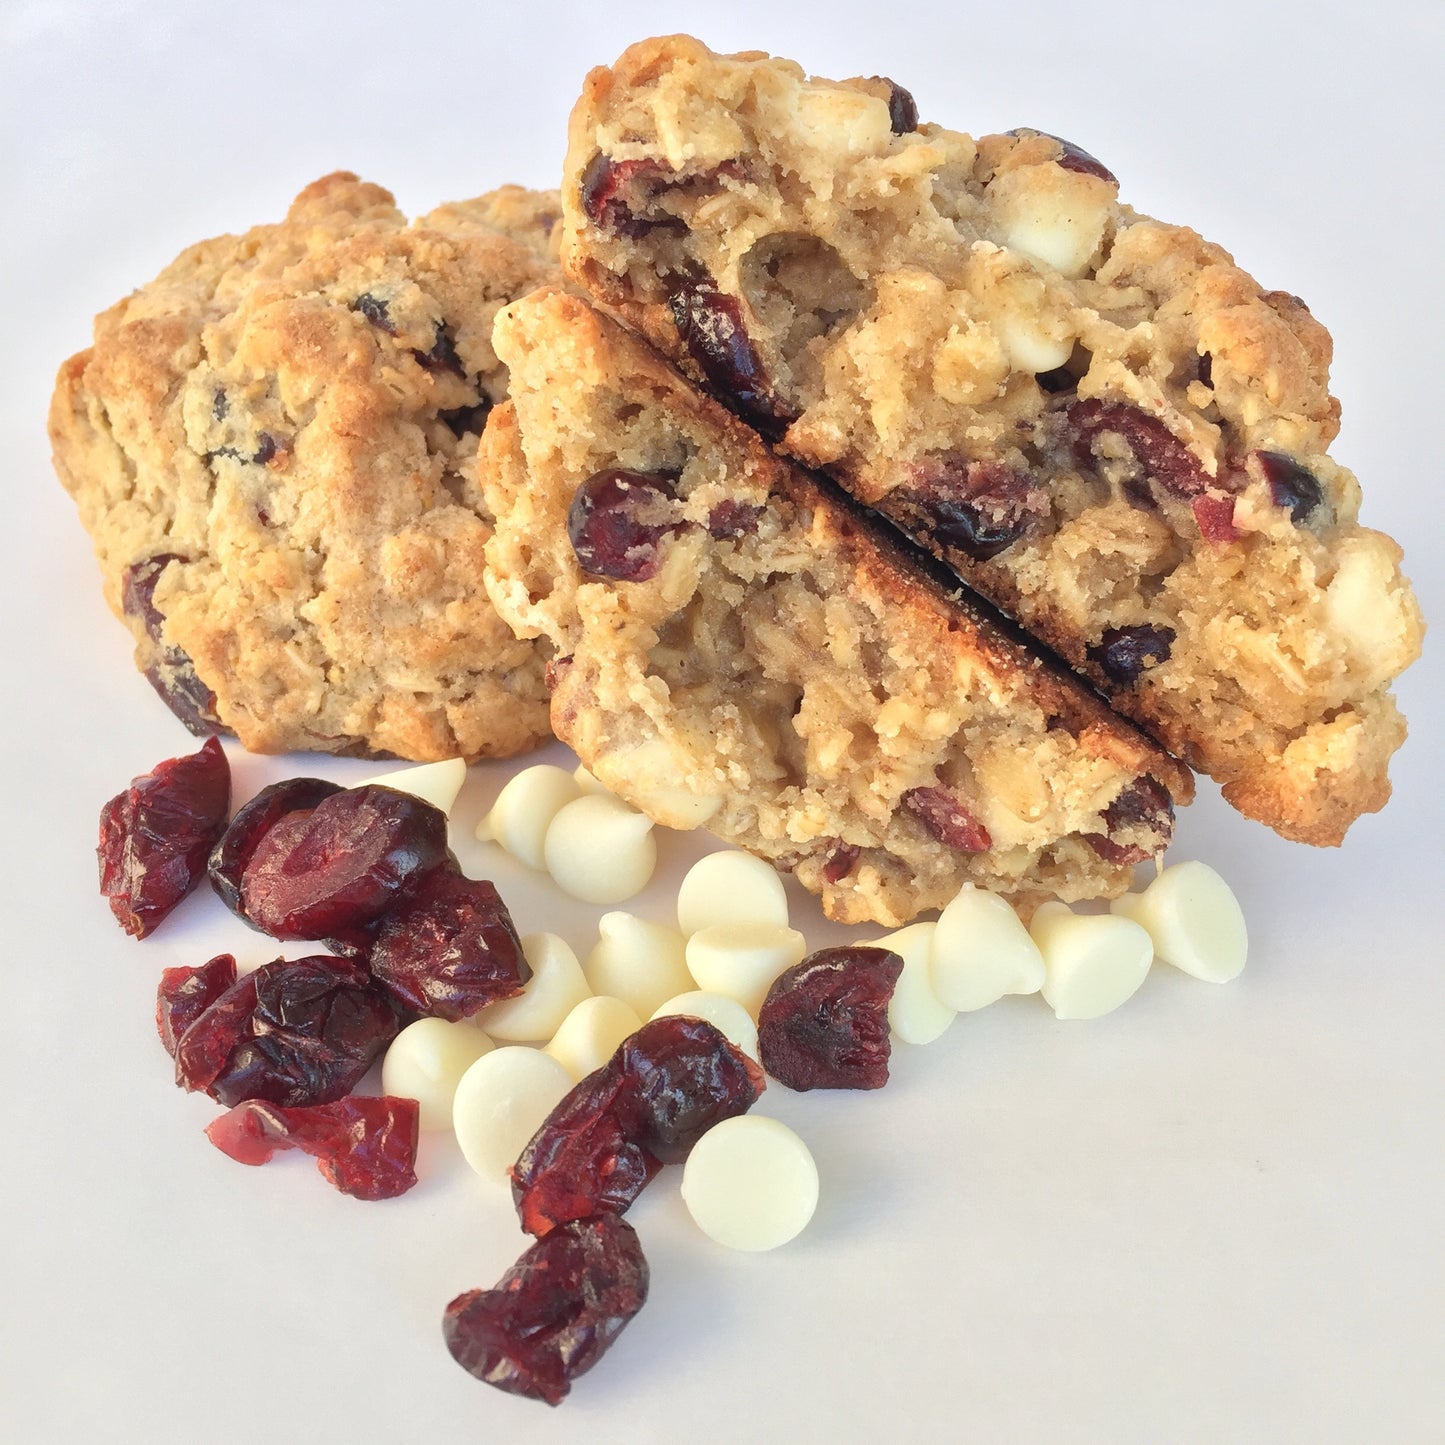 Oatmeal Orange Cranberry with White Chocolate